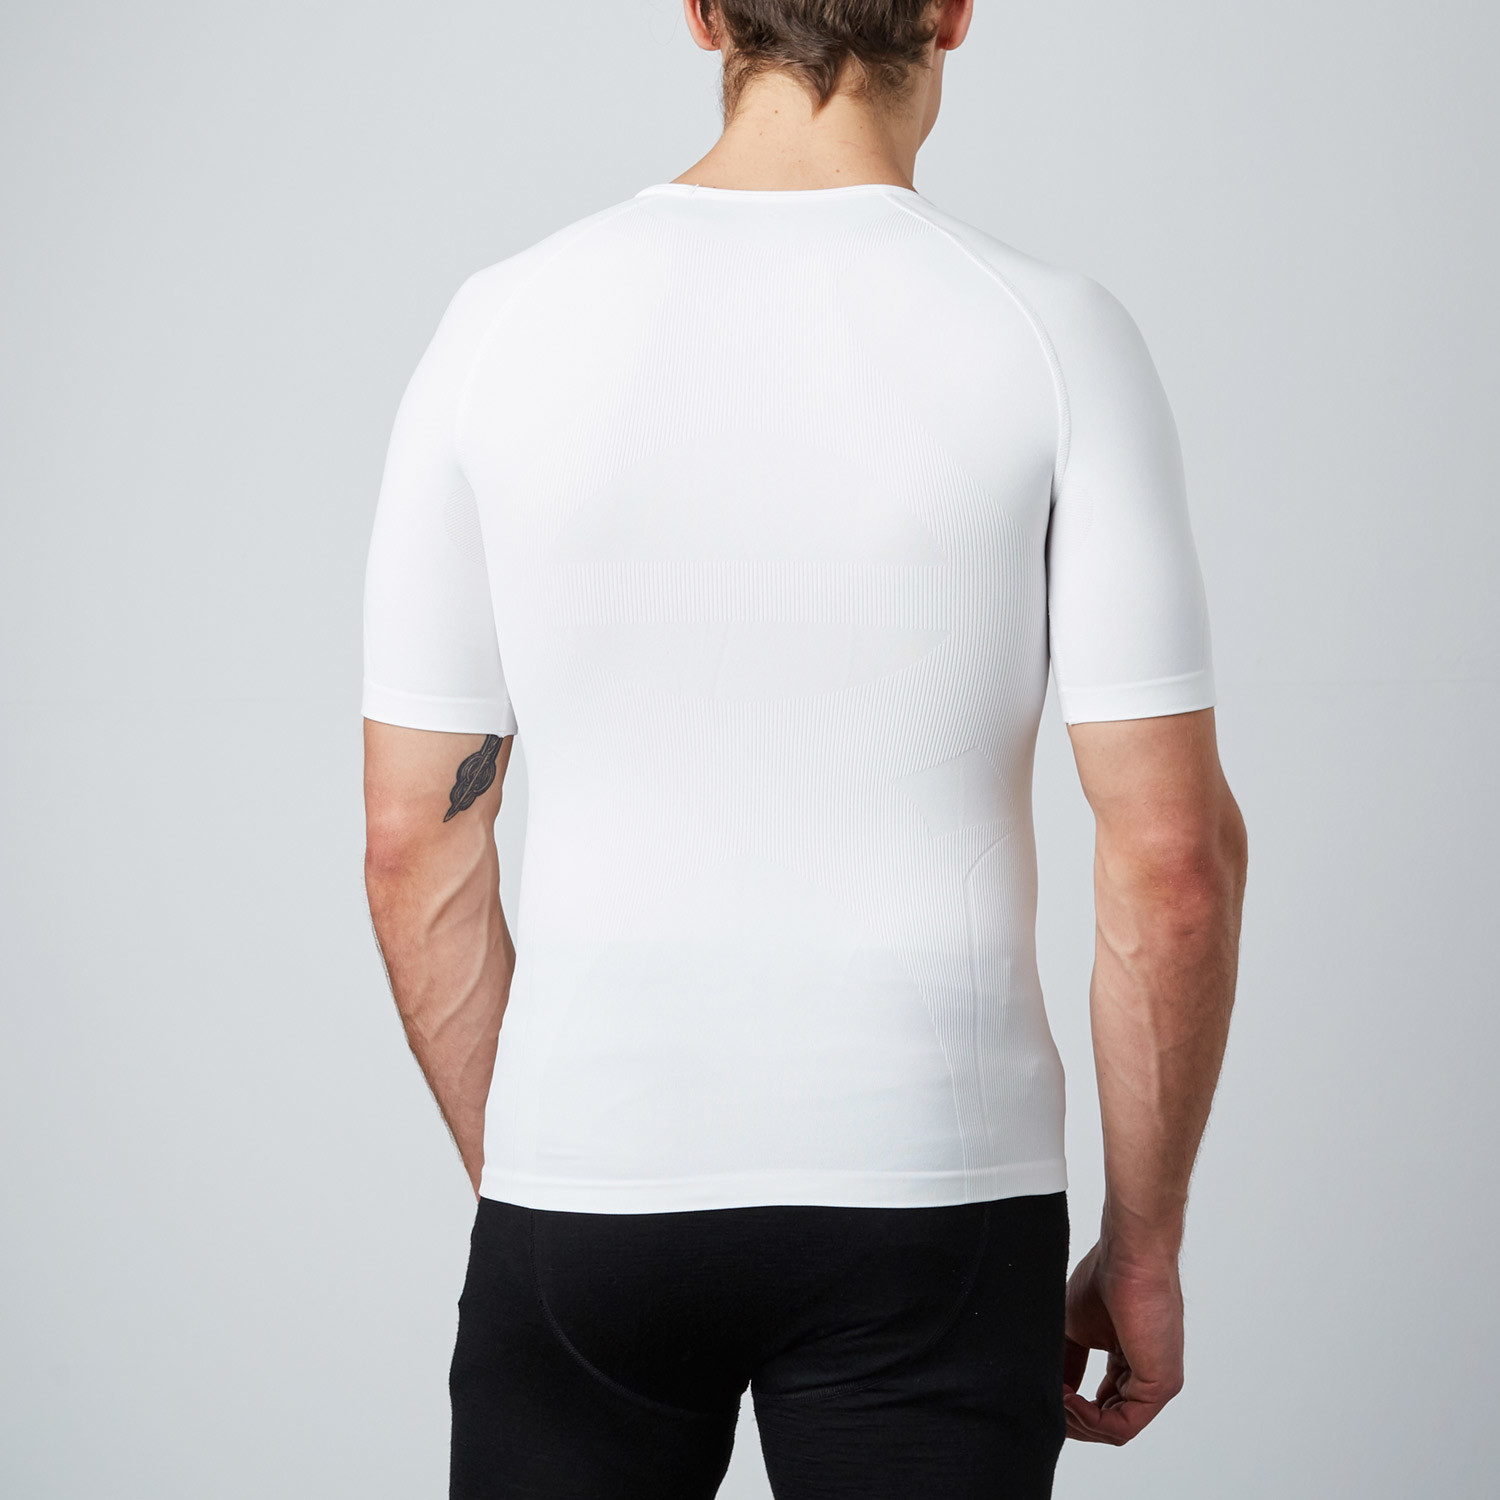 Compression Short-Sleeve Shirt // White (S) - RounderBum - Touch of Modern